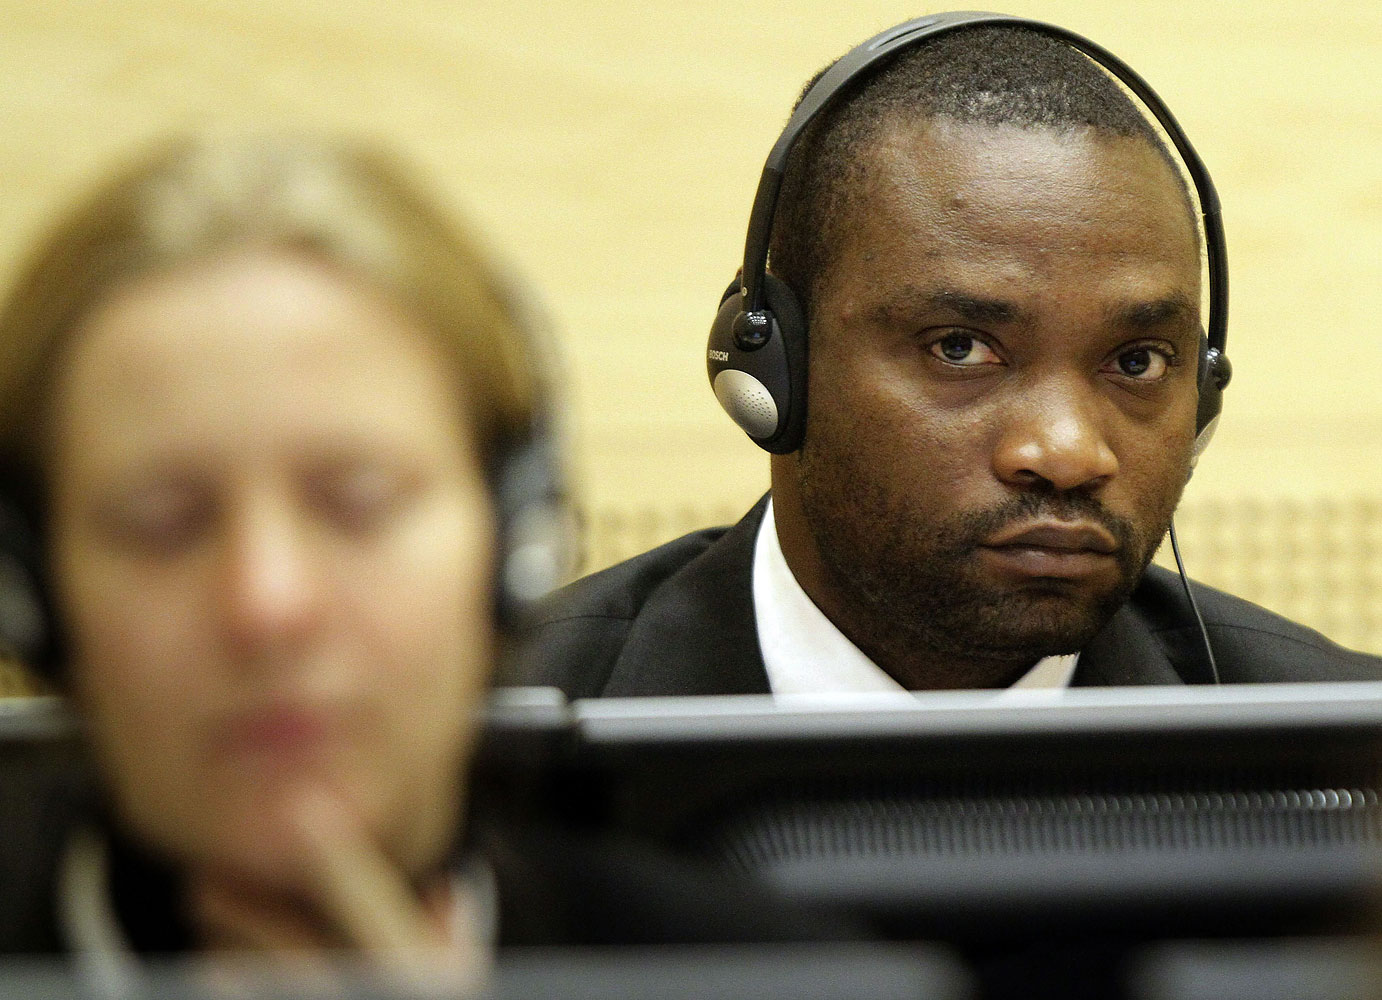 Former Congolese warlord militiaman Germain Katanga sitting in the courtroom of the International Criminal Court in The Hague in 2009.